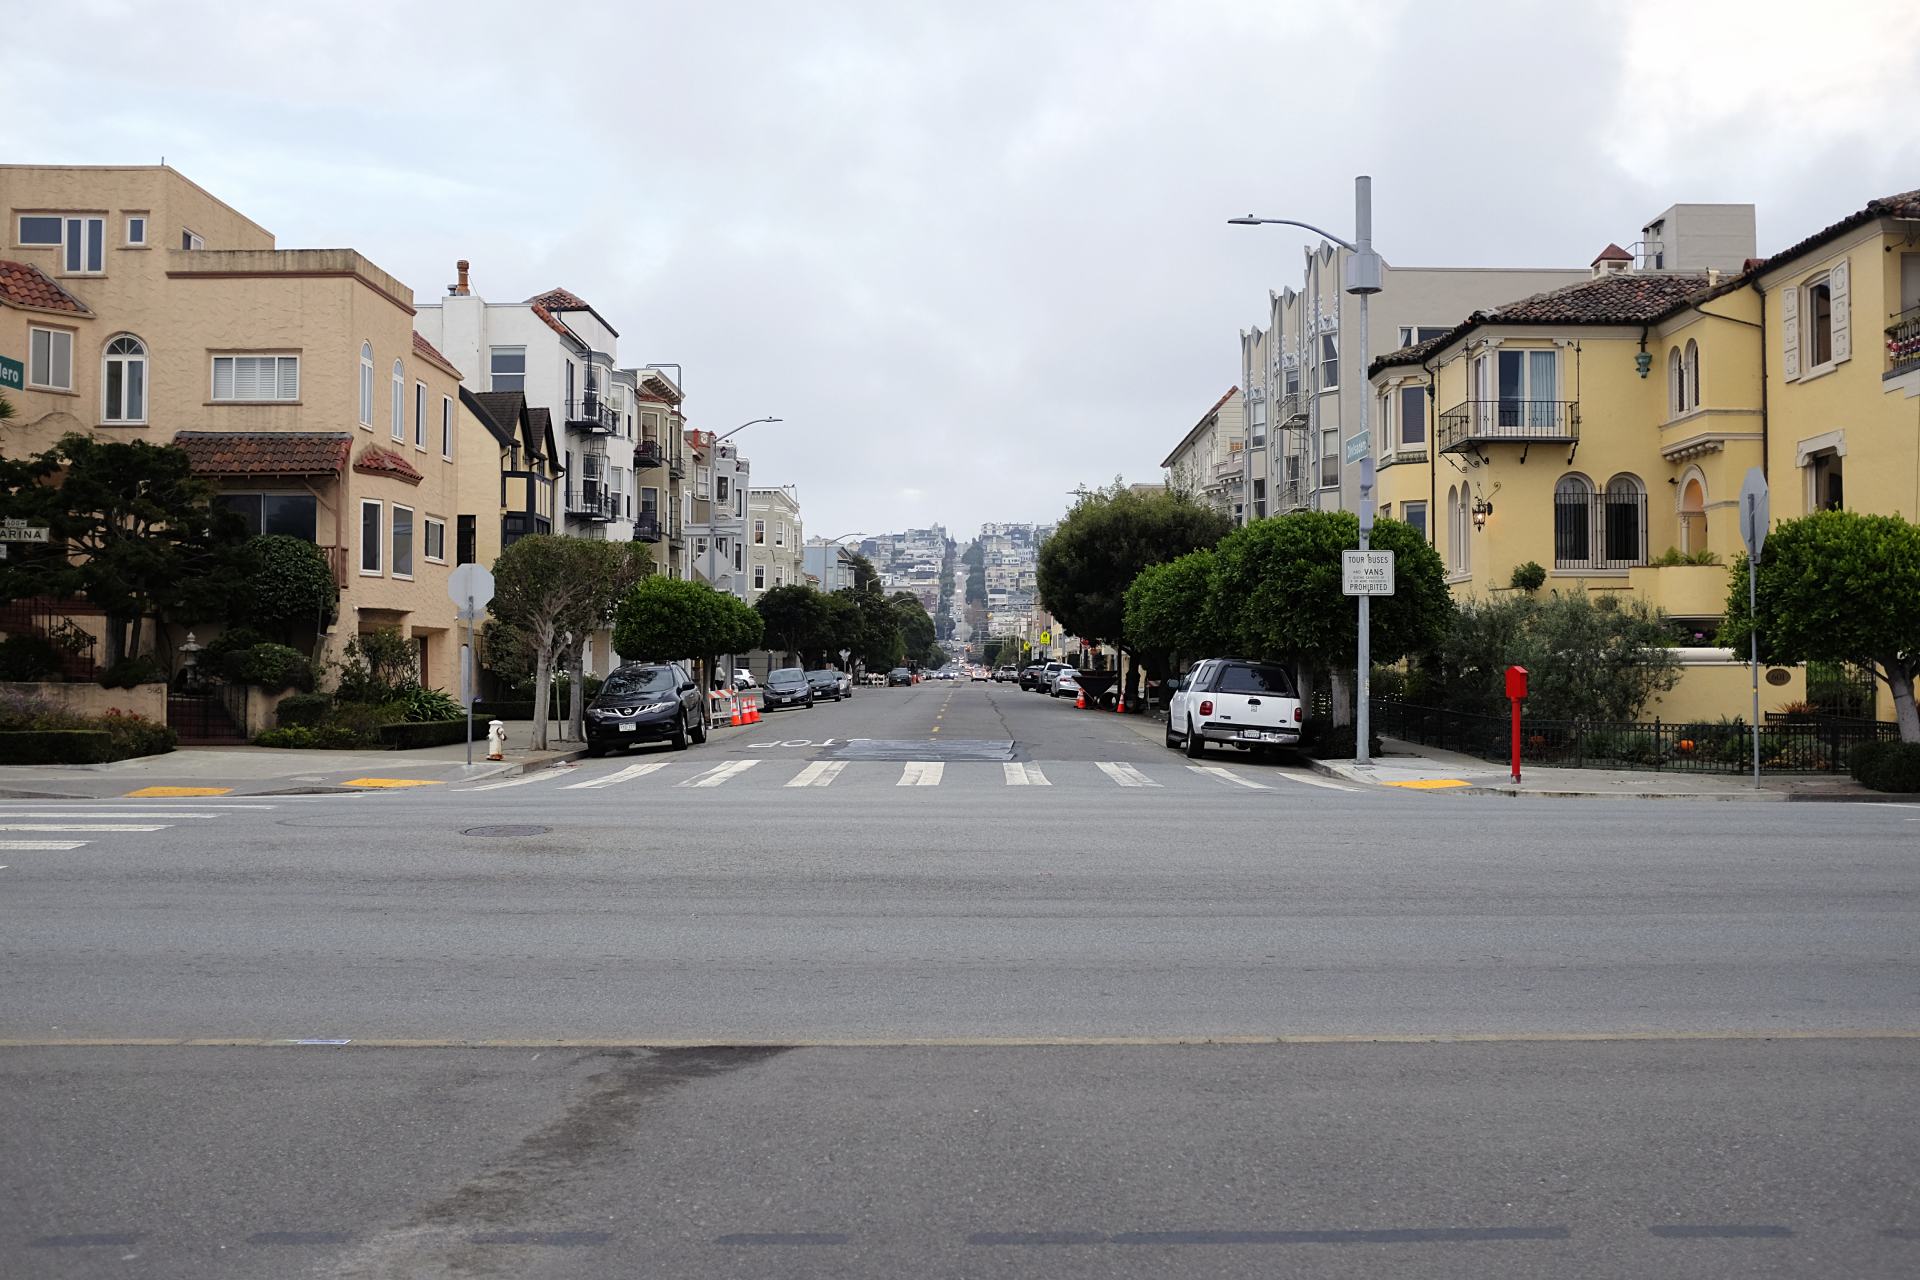 A view of a typical street in San Francisco - the road is very steep!